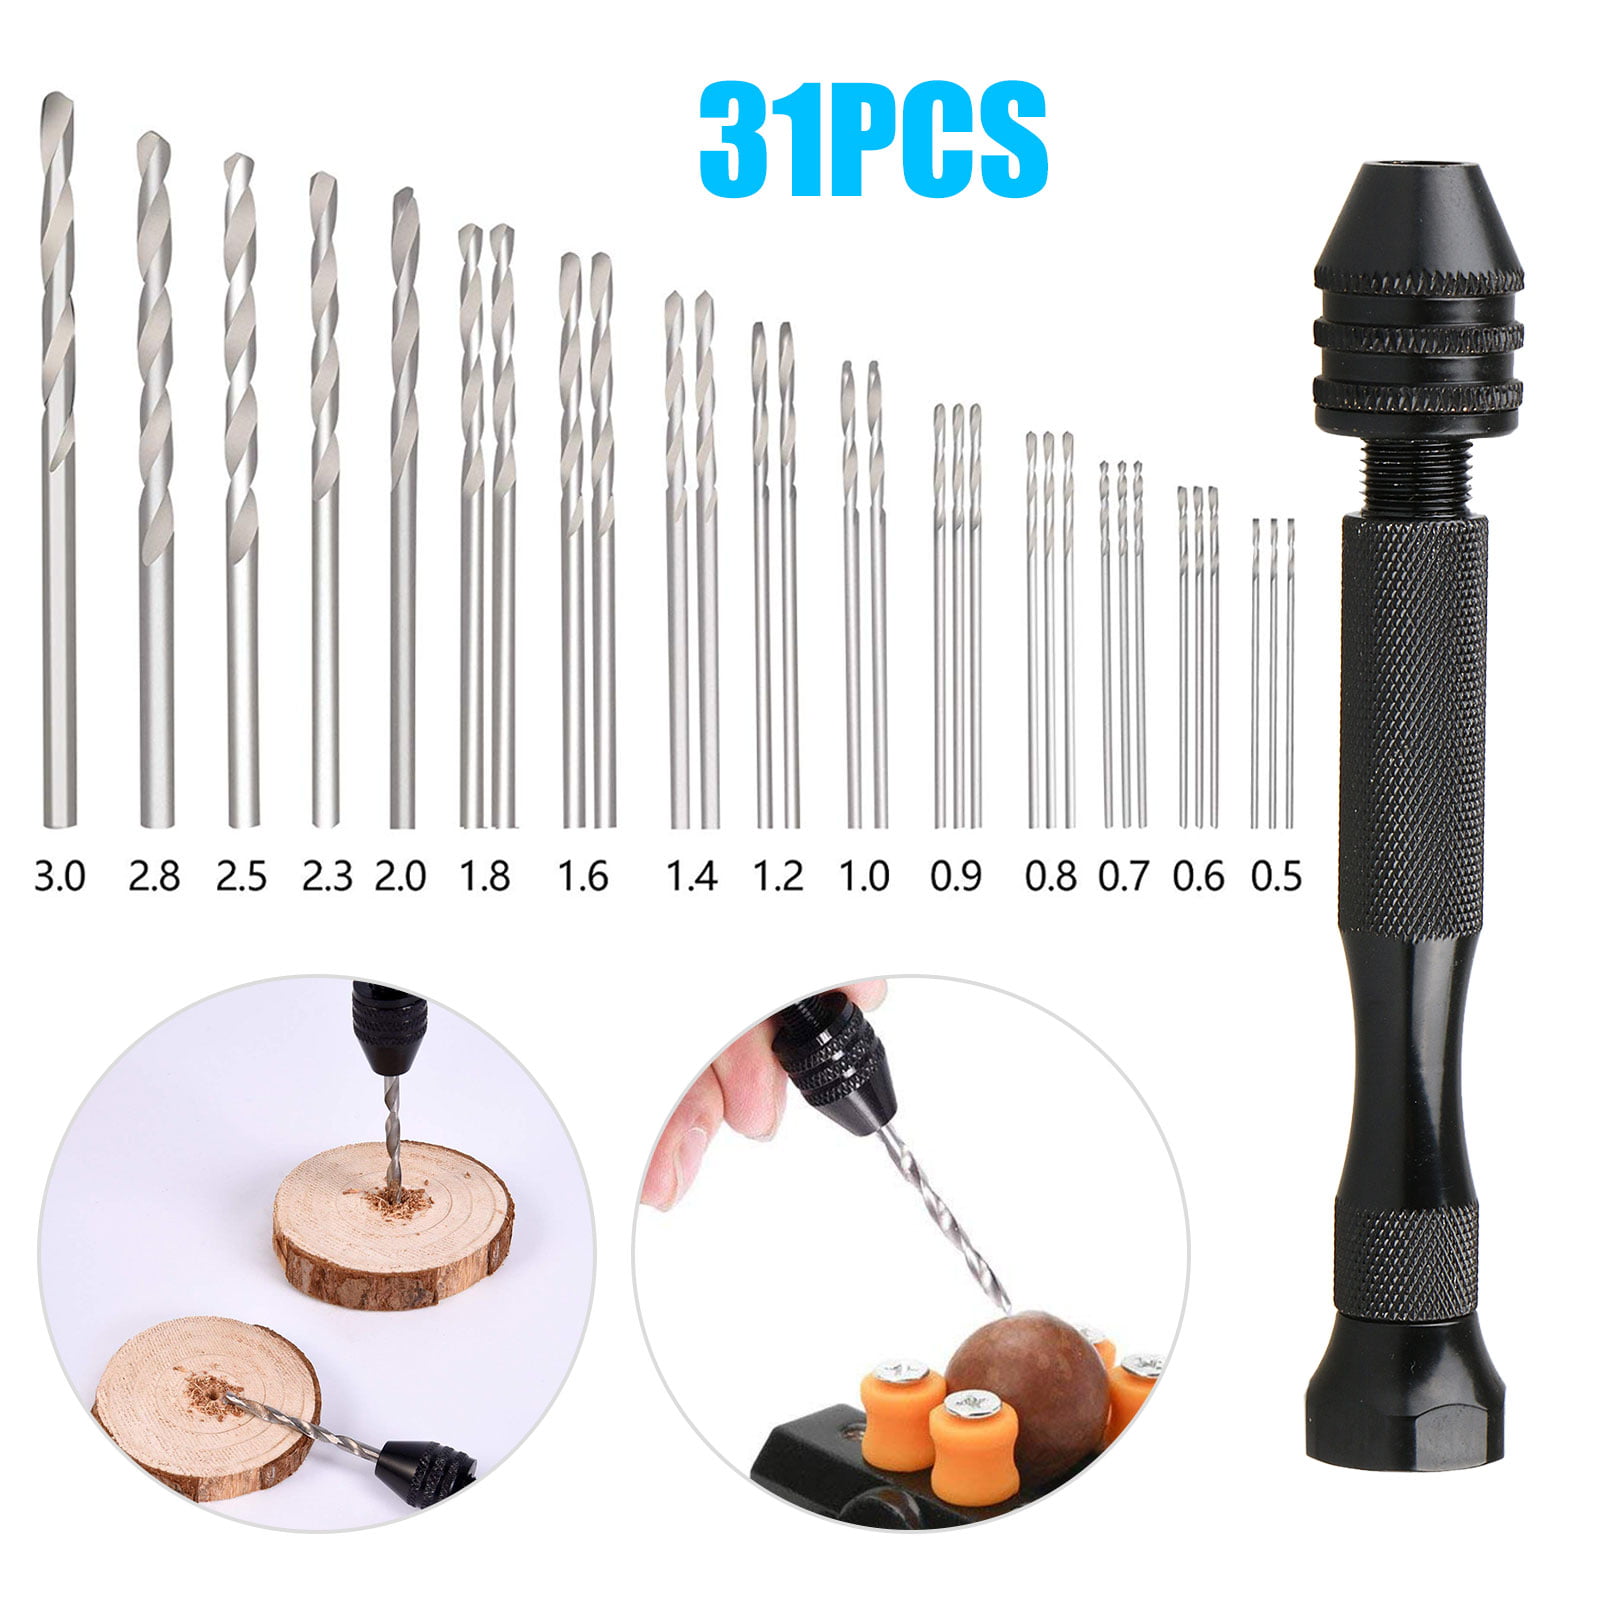 12 Pieces Twist Drill Bits Precision Pin Vise Woodworking Hand Drill for Model Jewelry Walnut Amber Beeswax Olive Nut